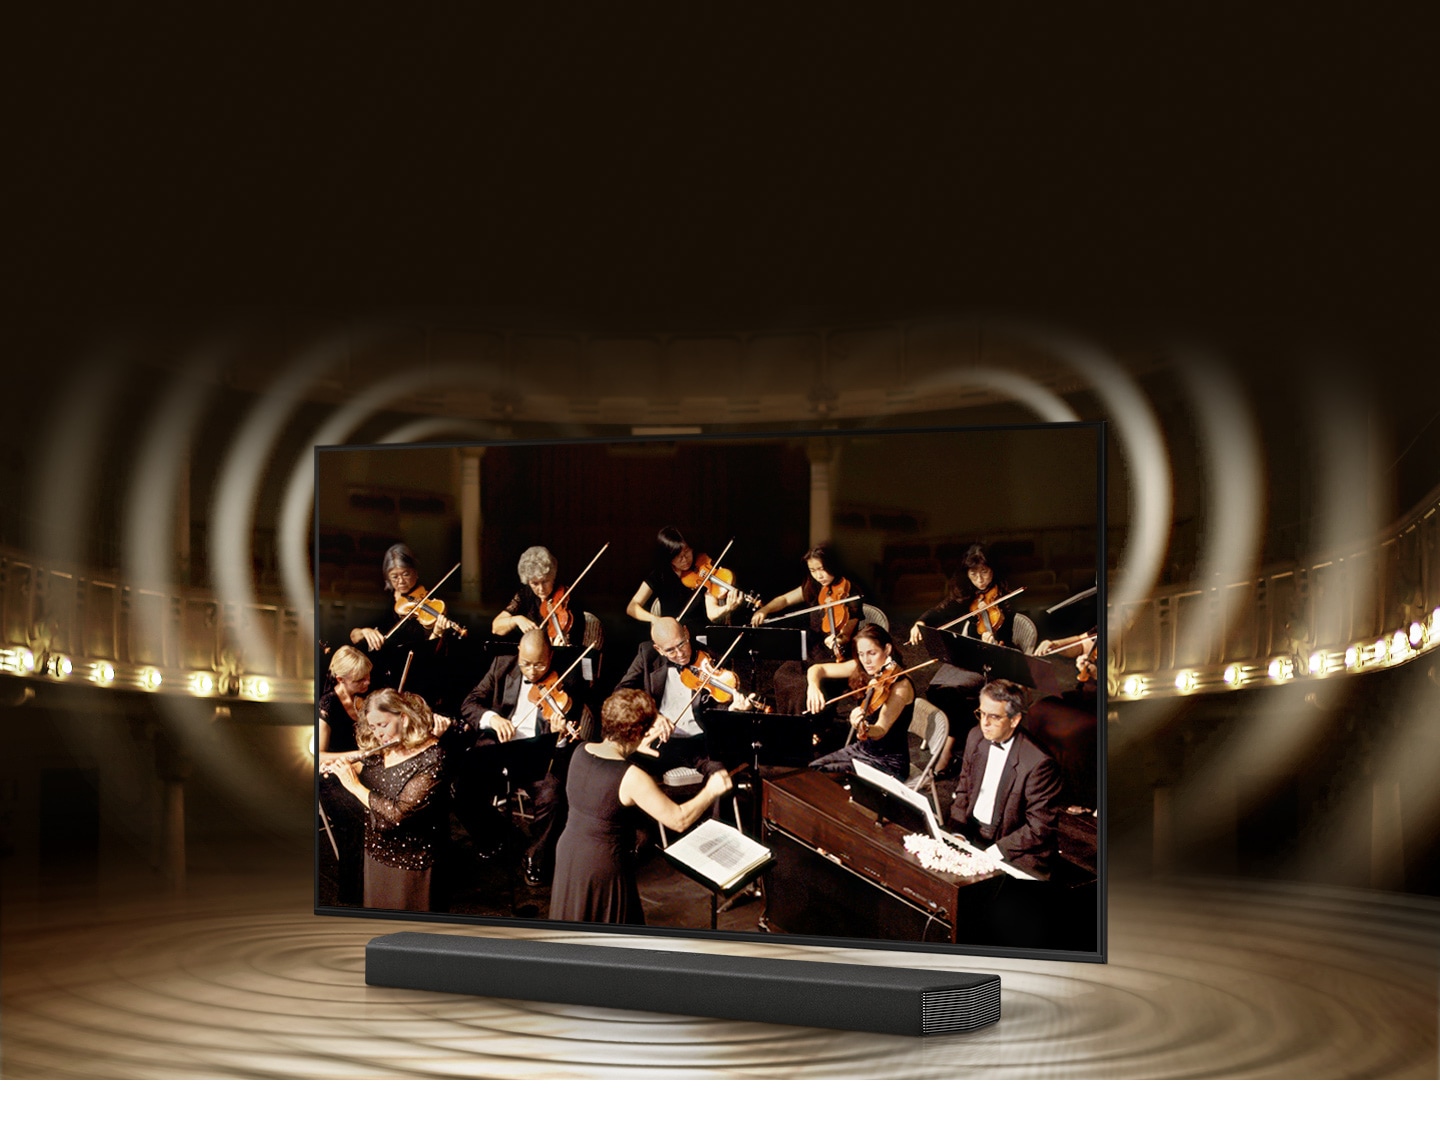 ru feature tv and soundbar orchestrated in perfect harmony 426343543?%24ORIGIN IMG%24